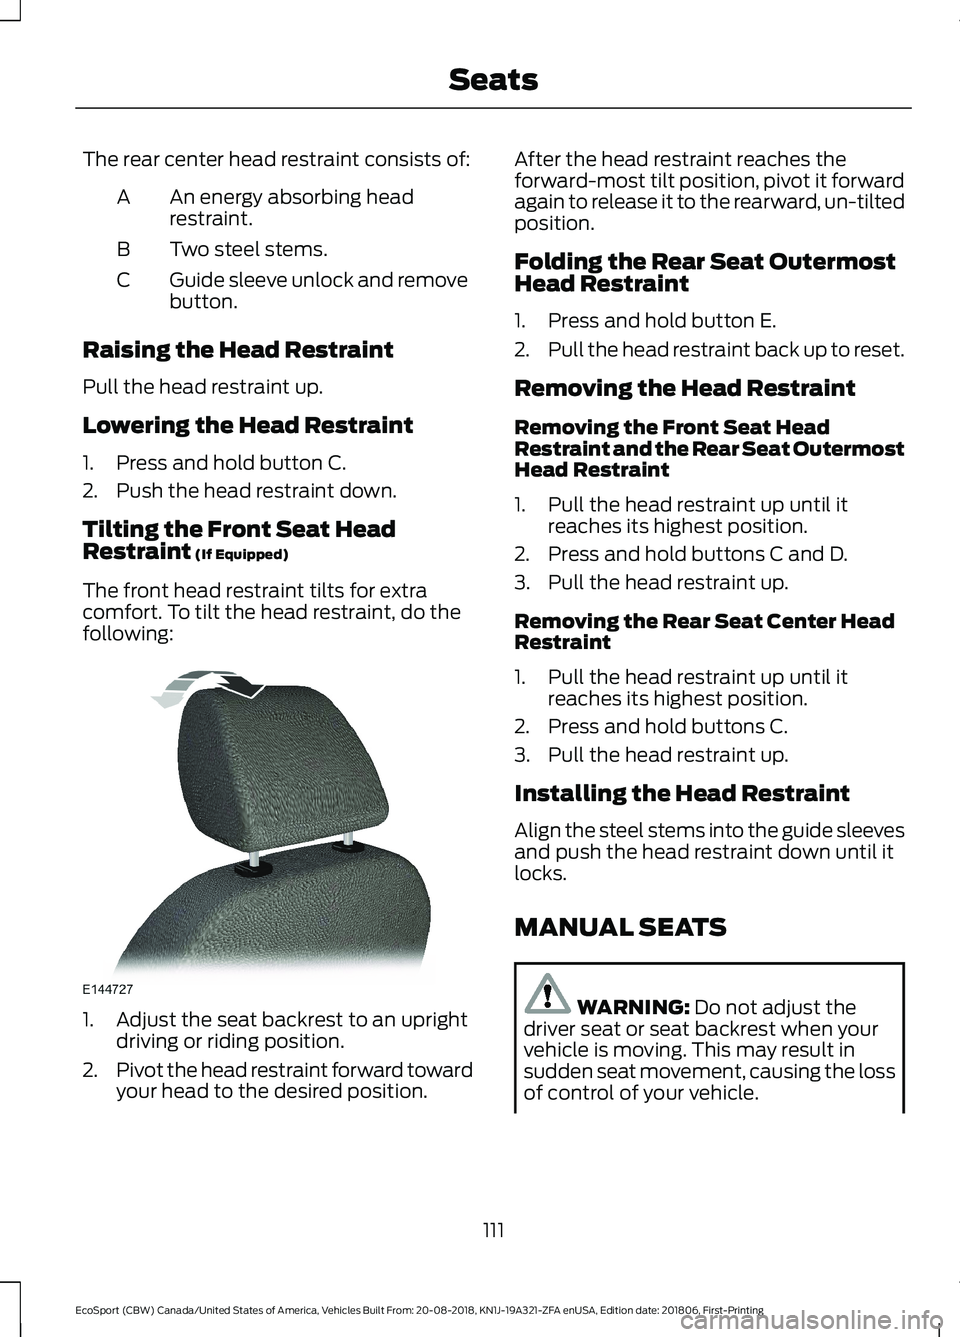 FORD ECOSPORT 2019  Owners Manual The rear center head restraint consists of:
An energy absorbing headrestraint.A
Two steel stems.B
Guide sleeve unlock and removebutton.C
Raising the Head Restraint
Pull the head restraint up.
Lowering